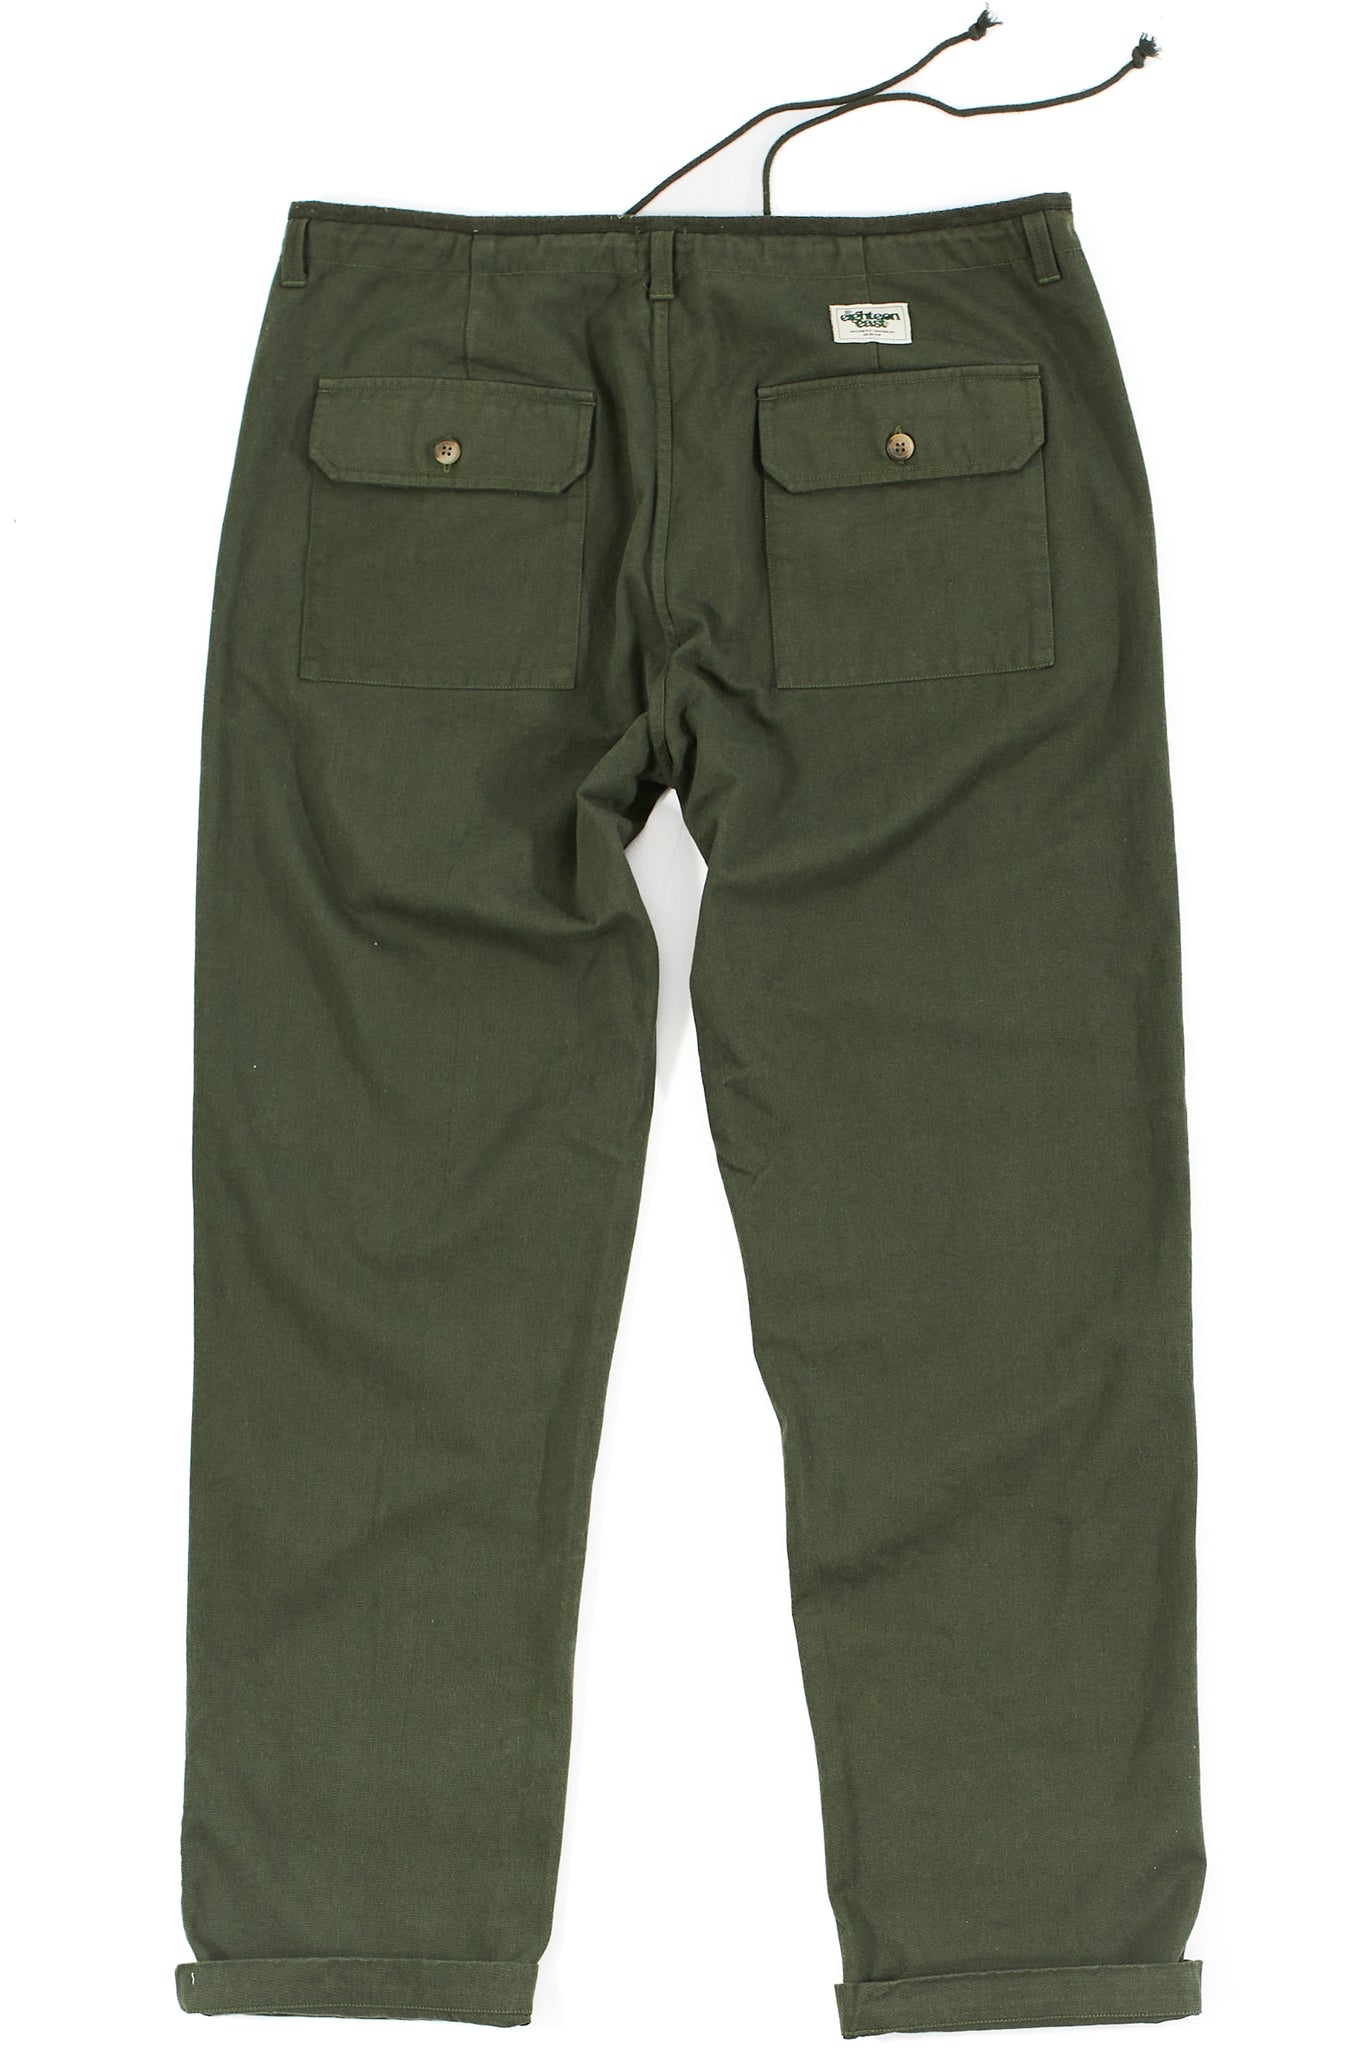 SHELTER PANT - CILANTRO HOMEGROWN TWILL